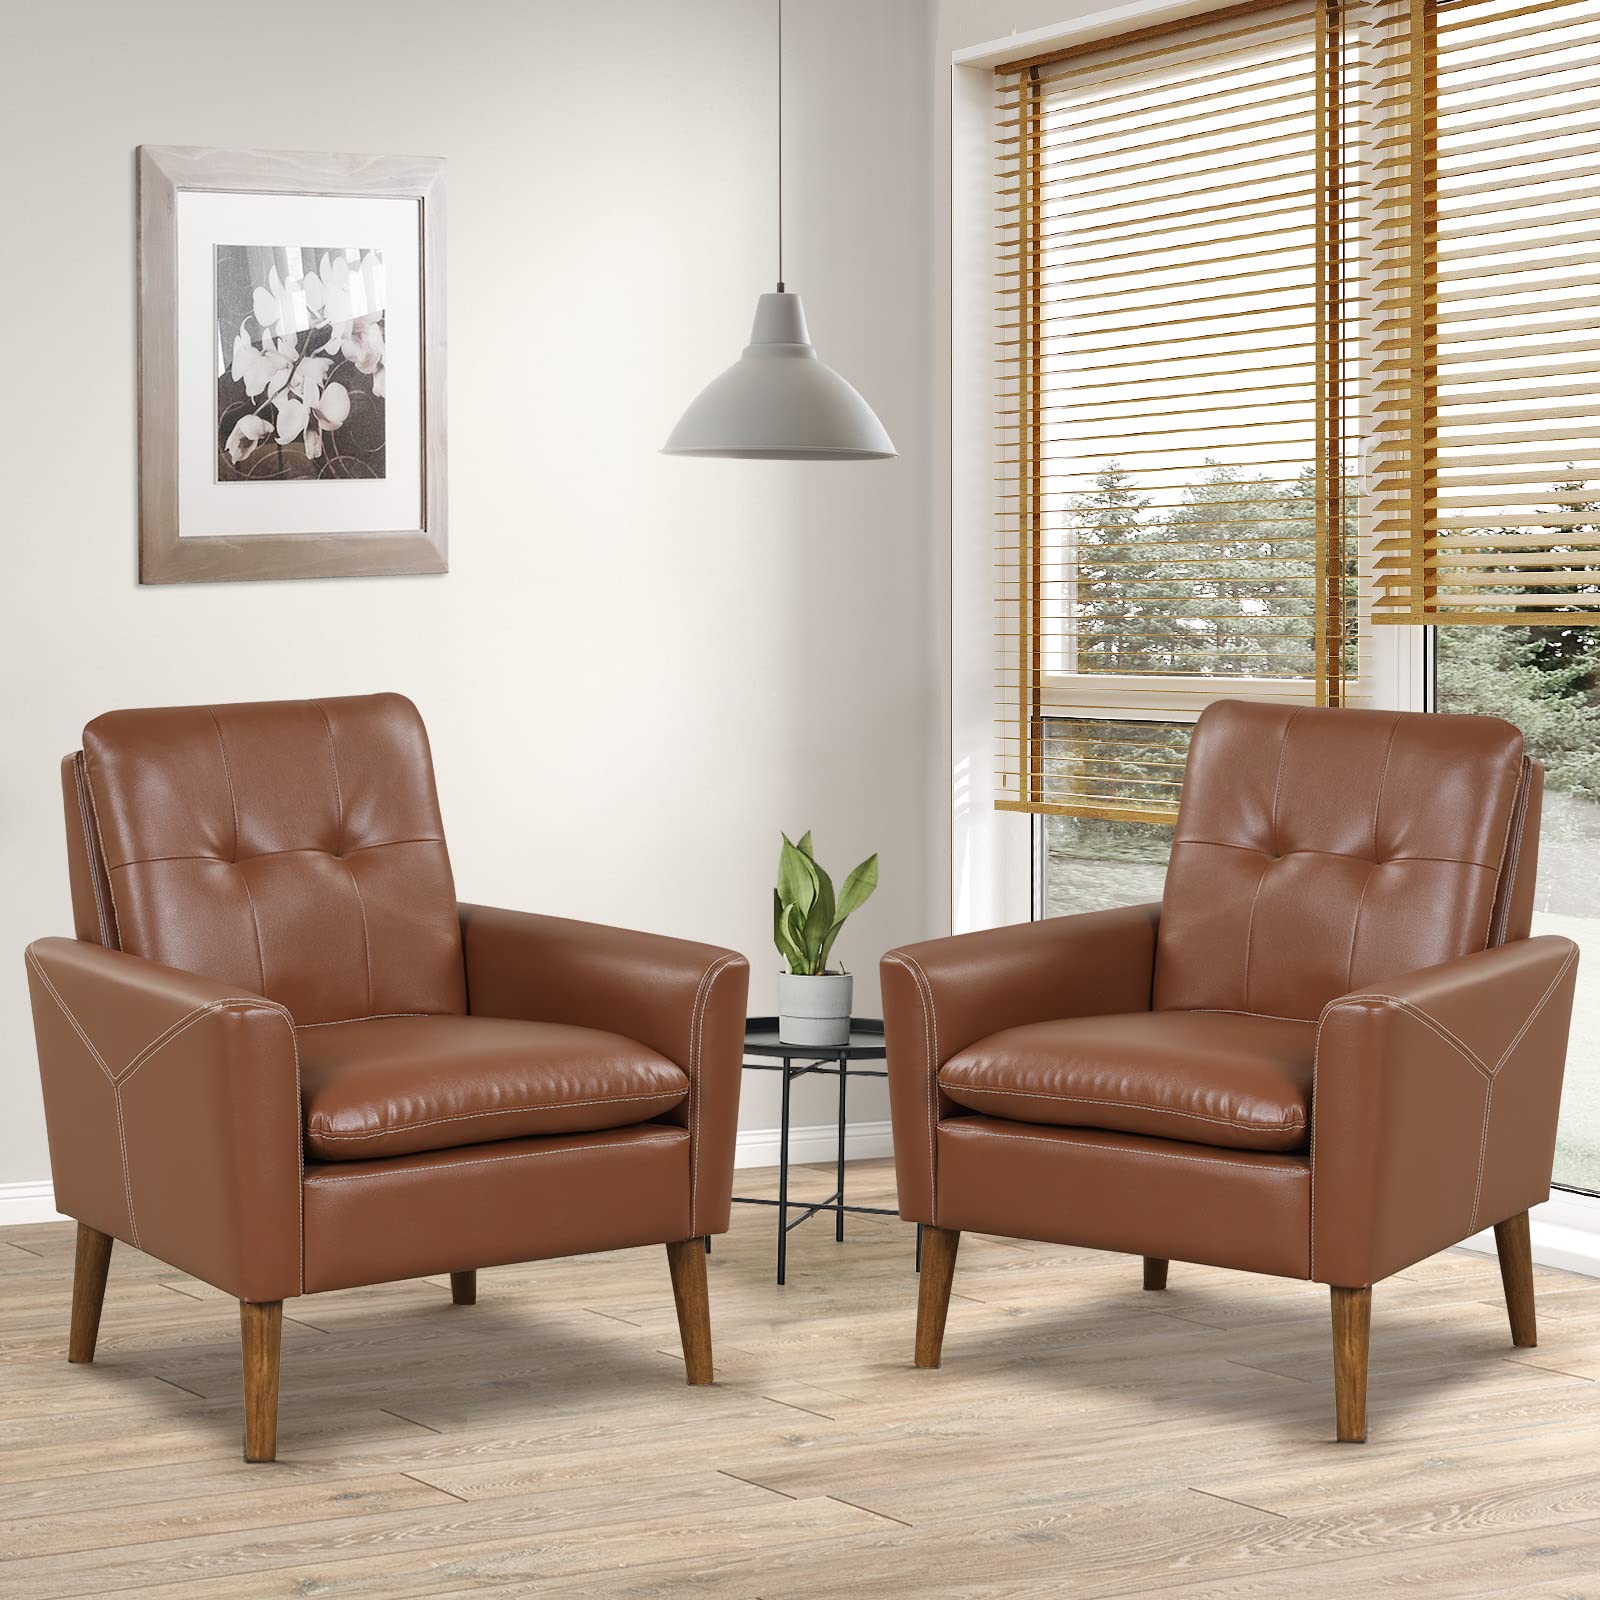 Giantex Modern Leather Accent Chair - Mid-Century Arm Chairs for Living Room, Max Load 400lbs, Brown